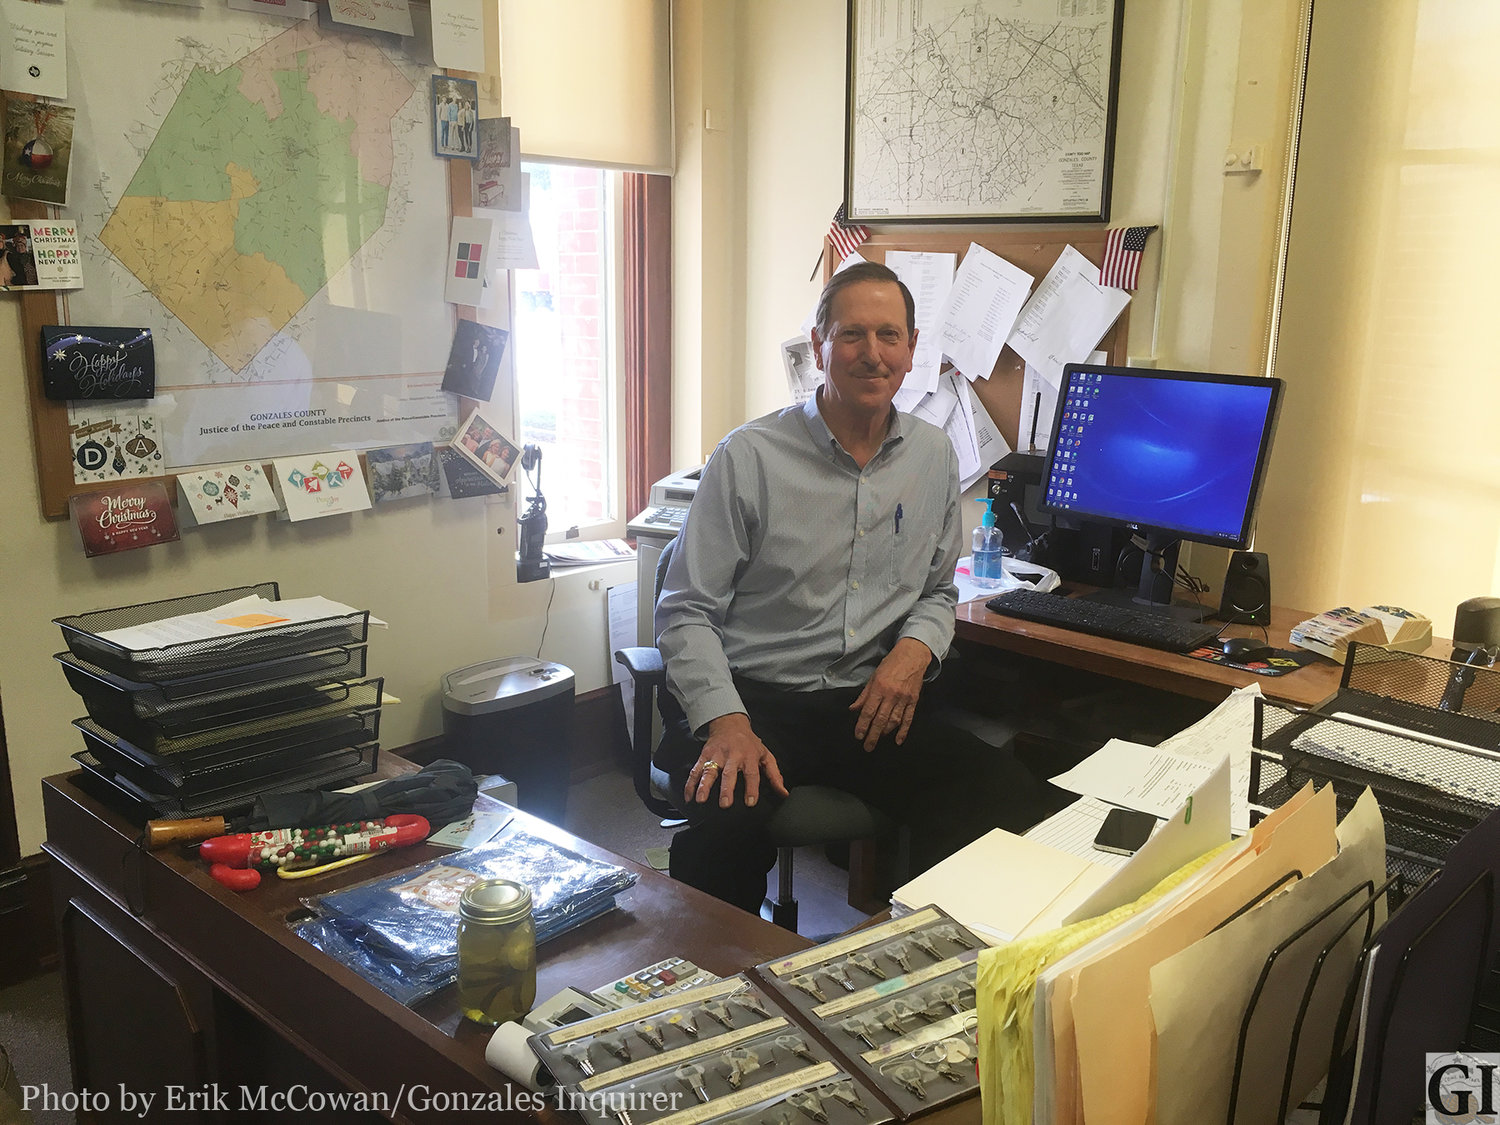 Gonzales County Judge David Bird took a little time last week to chat with the Inquirer about his accomplishments in office and of being the last Democratic Party elected official in office here. Bird declined to run for a sixth consecutive term last year.